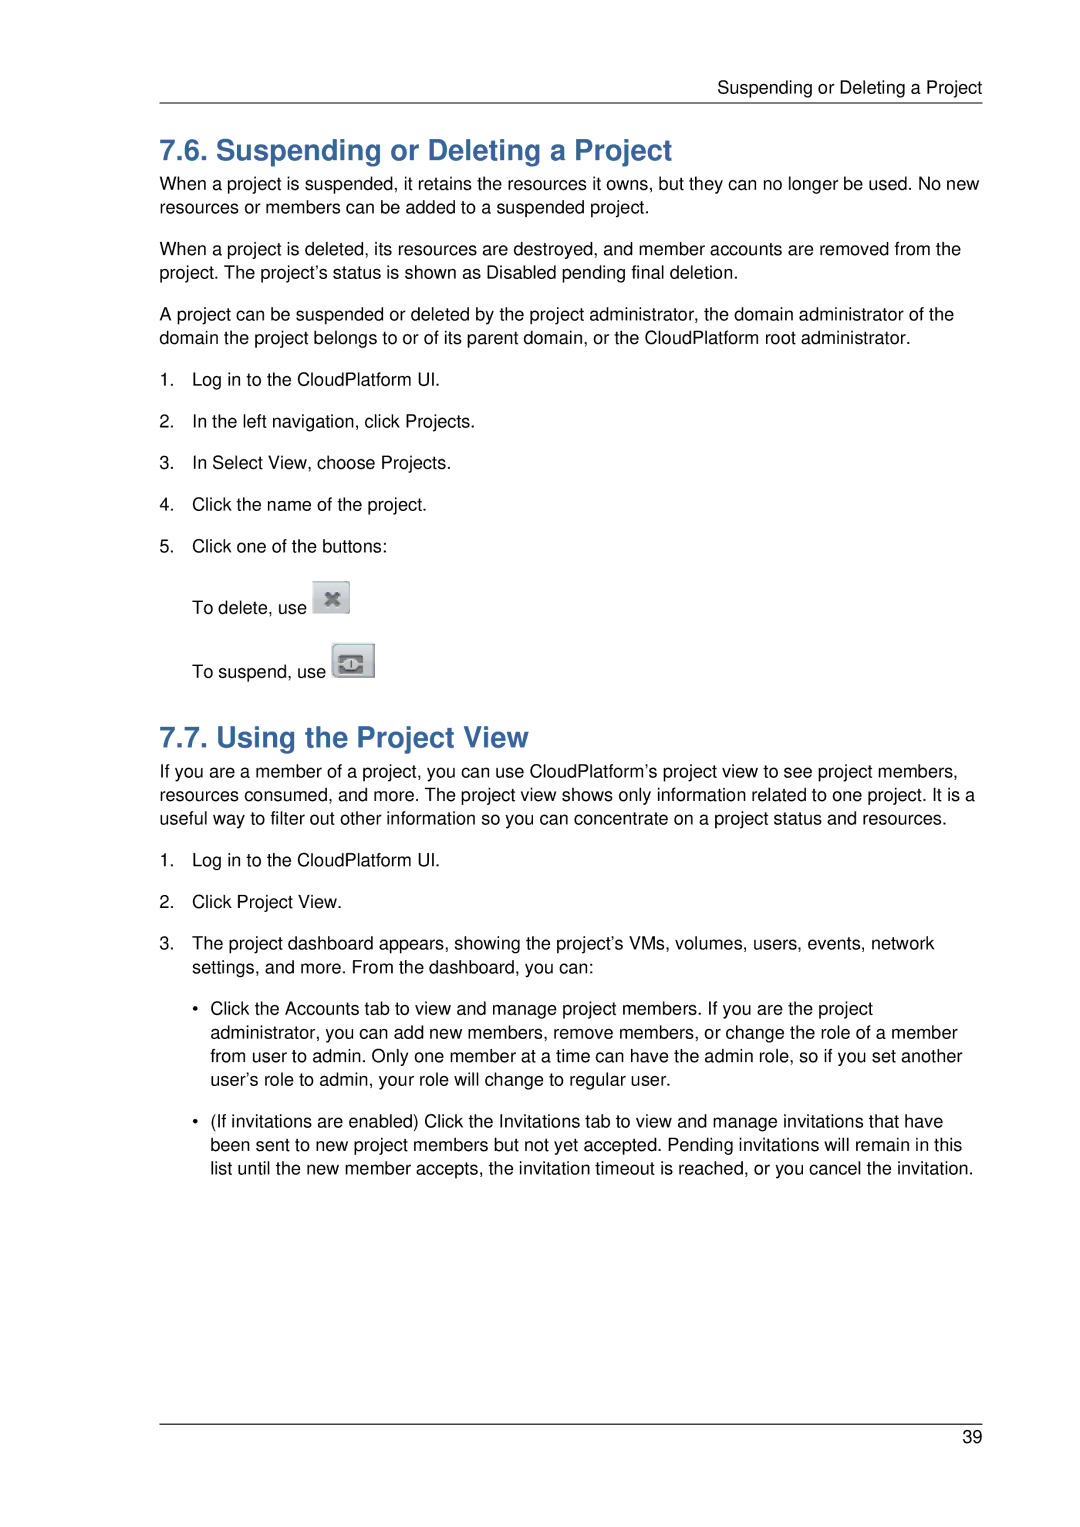 Citrix Systems 4.2 manual Suspending or Deleting a Project, Using the Project View 